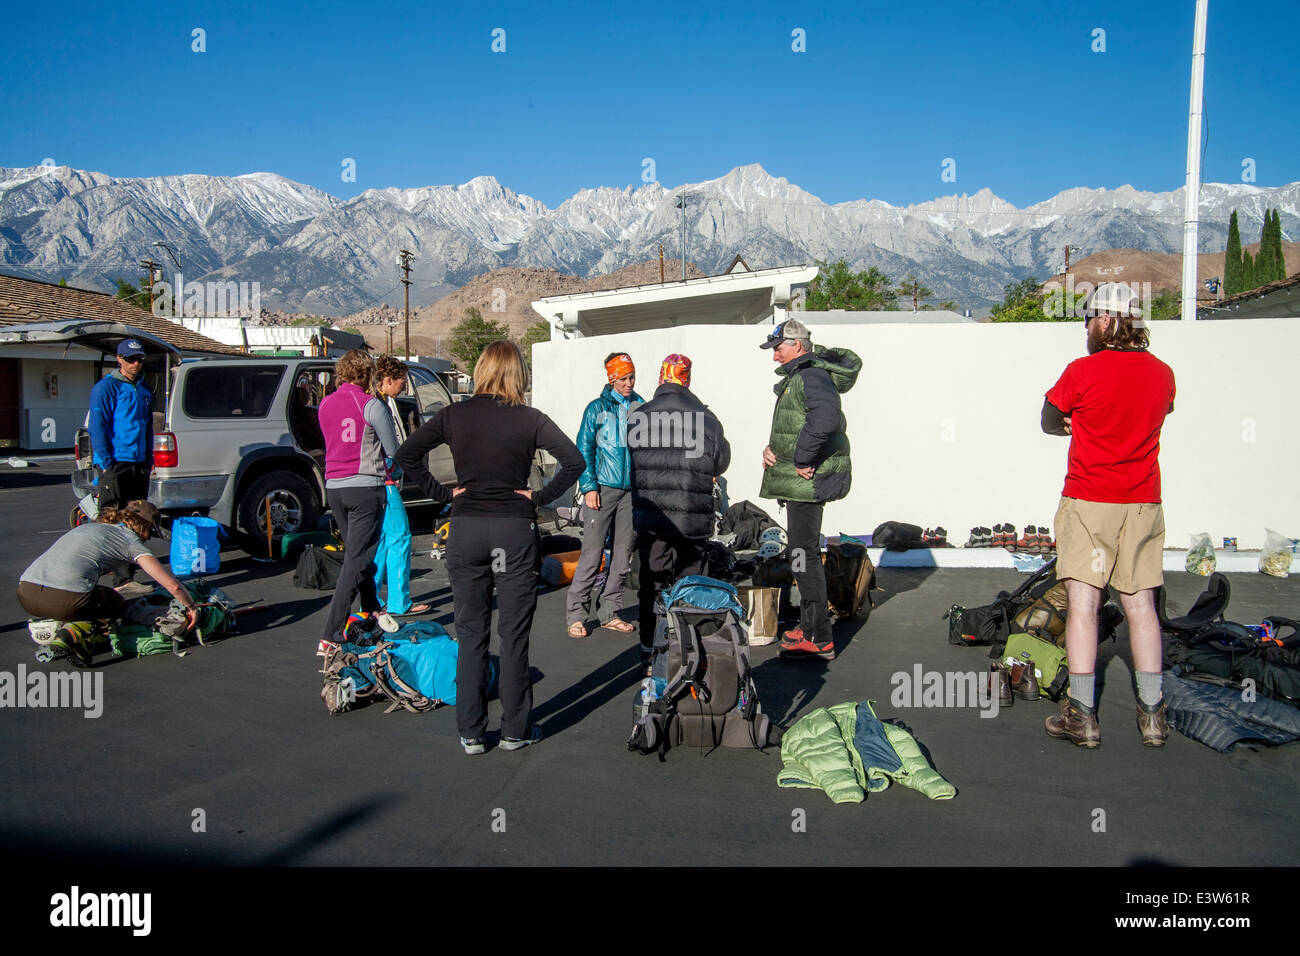 A rock climbing club gathers to organize their equipment before beginning an expedition in Lone Pine, CA. Note Sierra Nevada mountains in background. Stock Photo